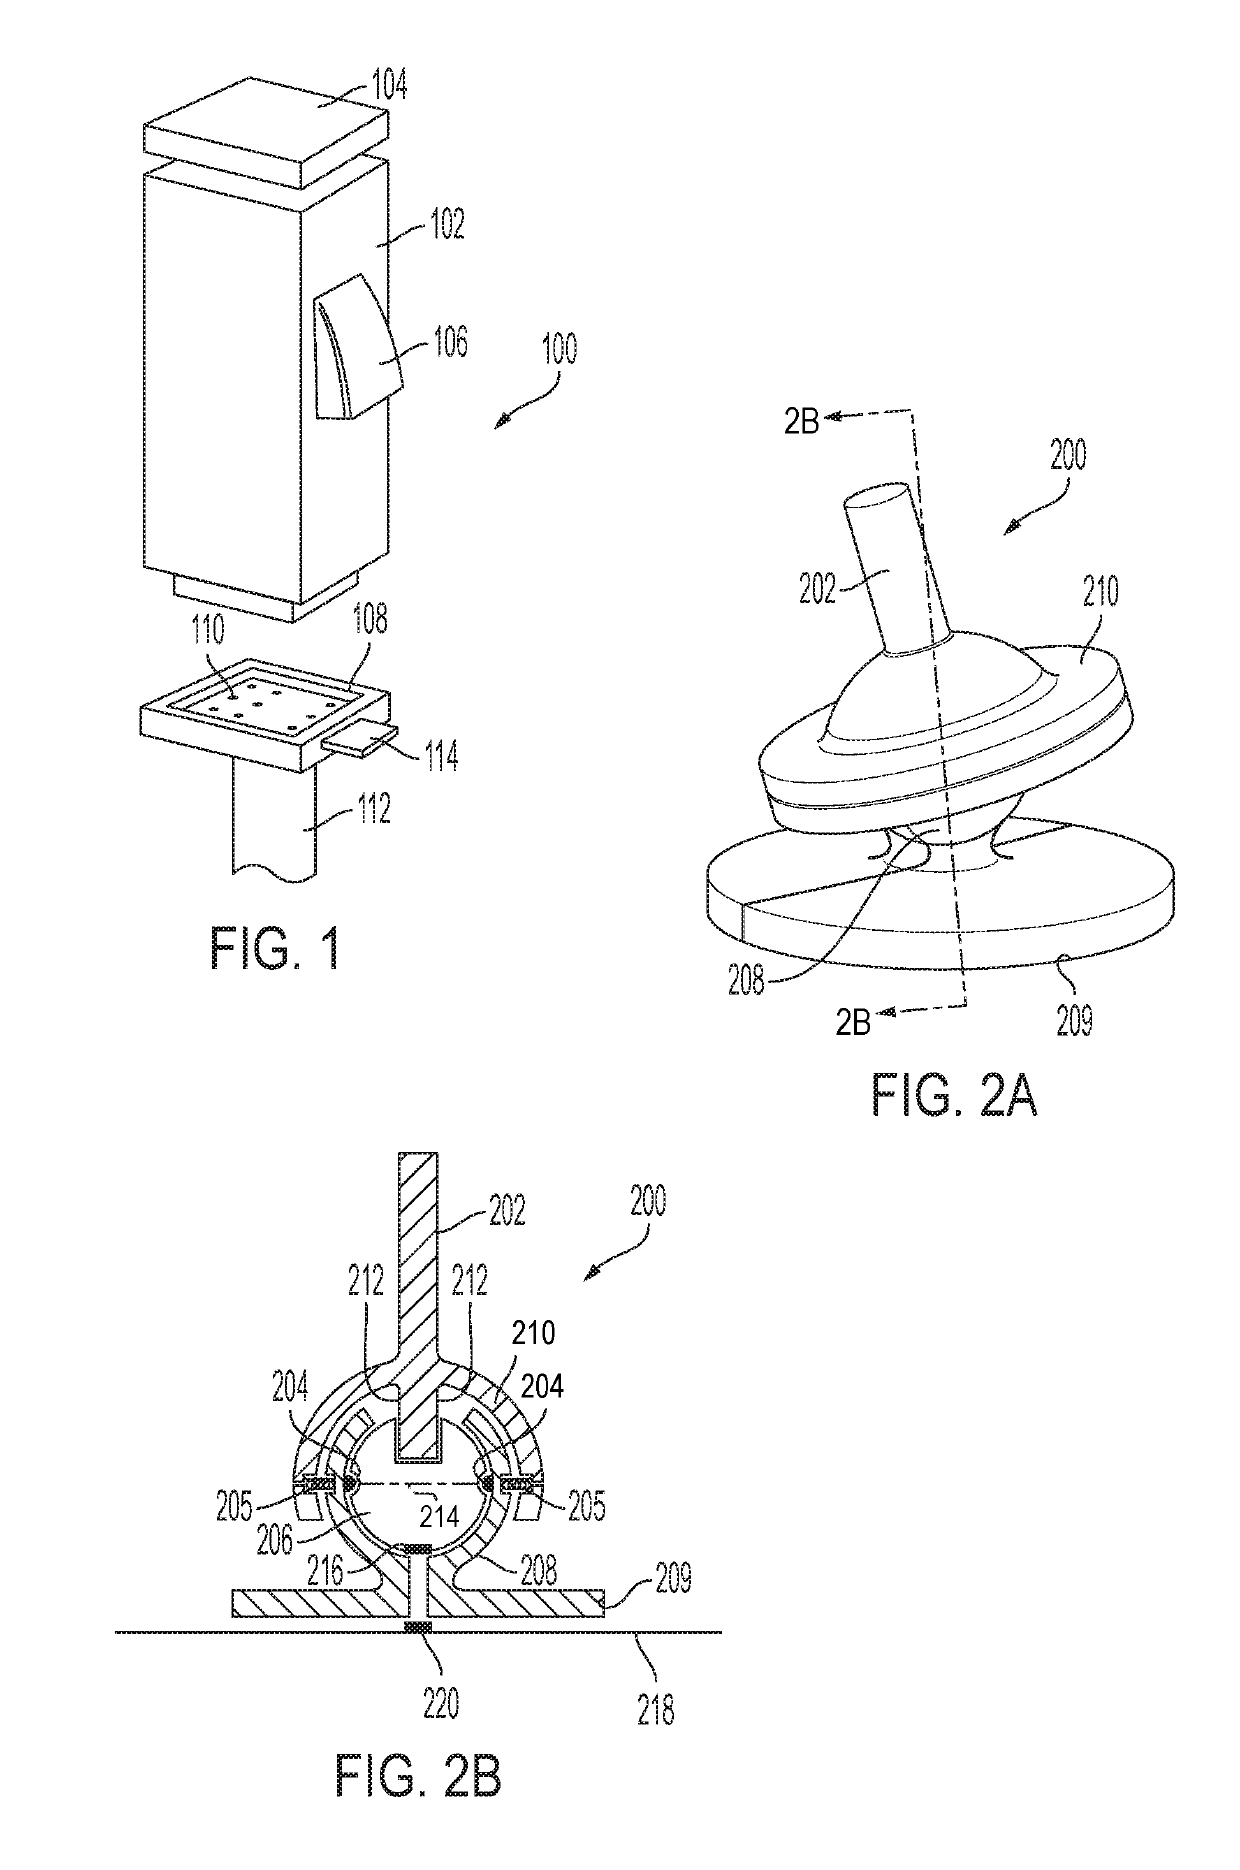 Multi-axis gimbal mounting for controller providing tactile feedback for the null command